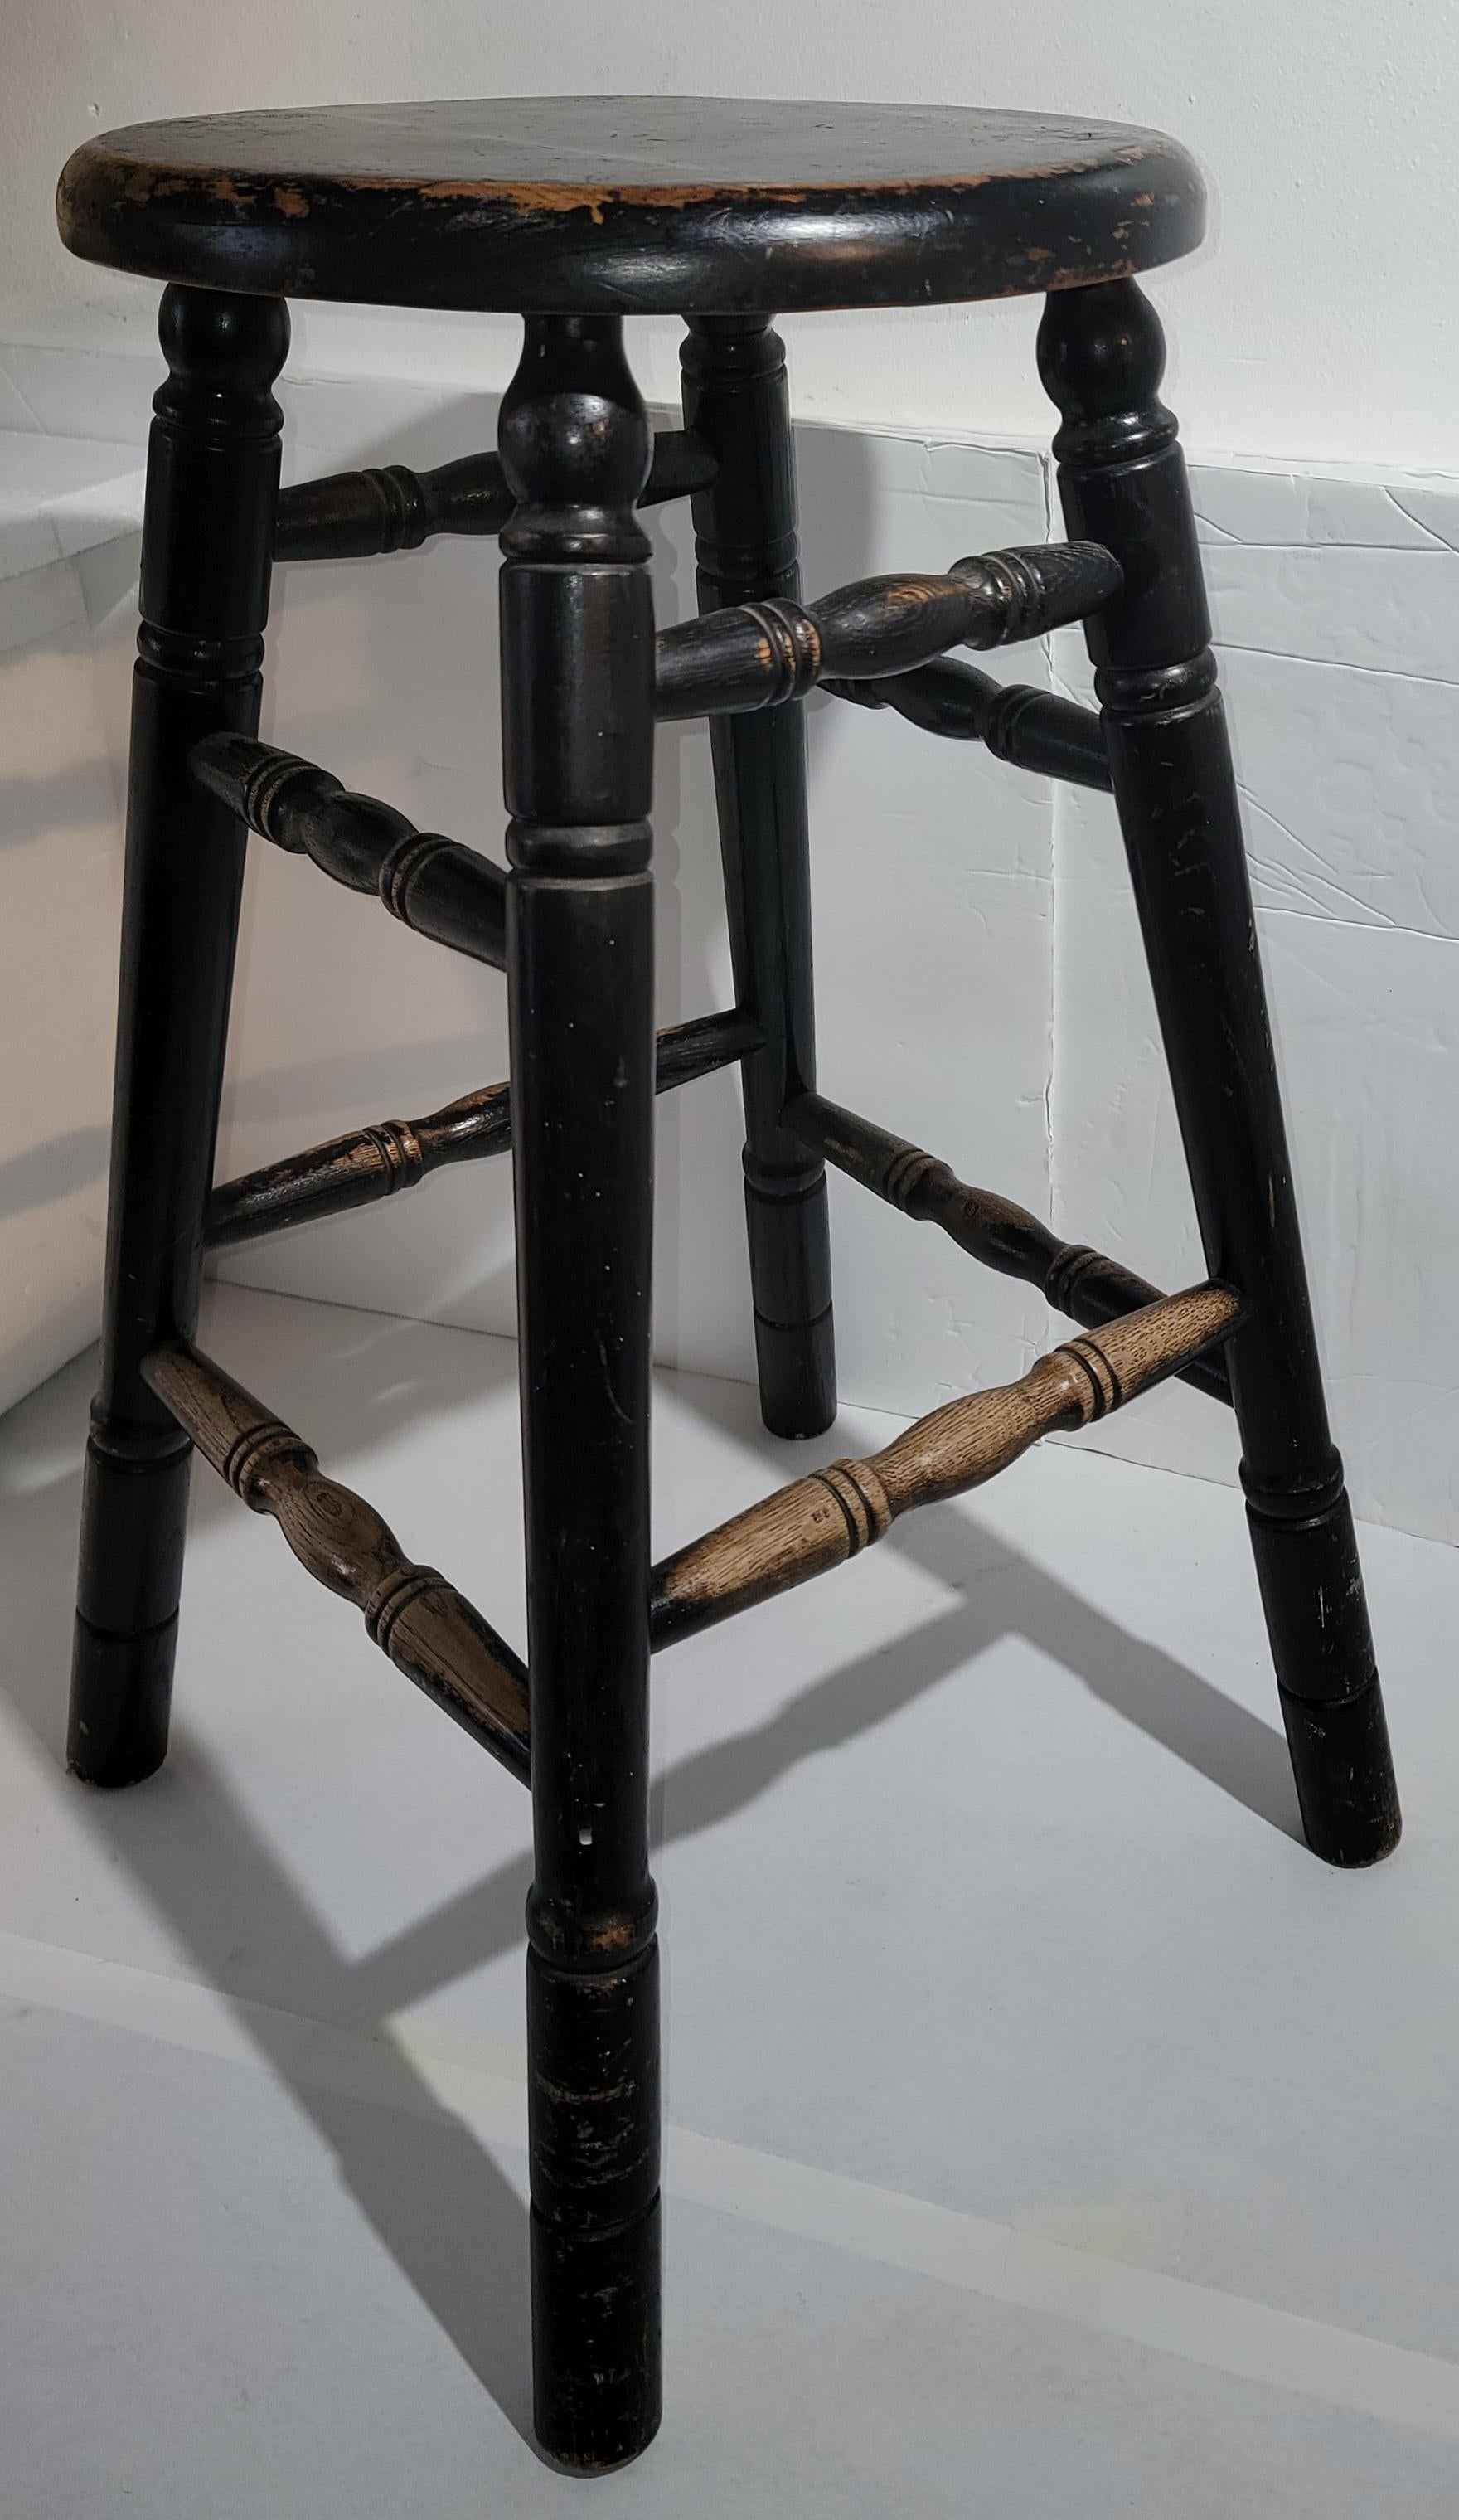 19thc Original black painted bar stool is in fine sturdy condition.This aged and worn paint is consistent from age and use.